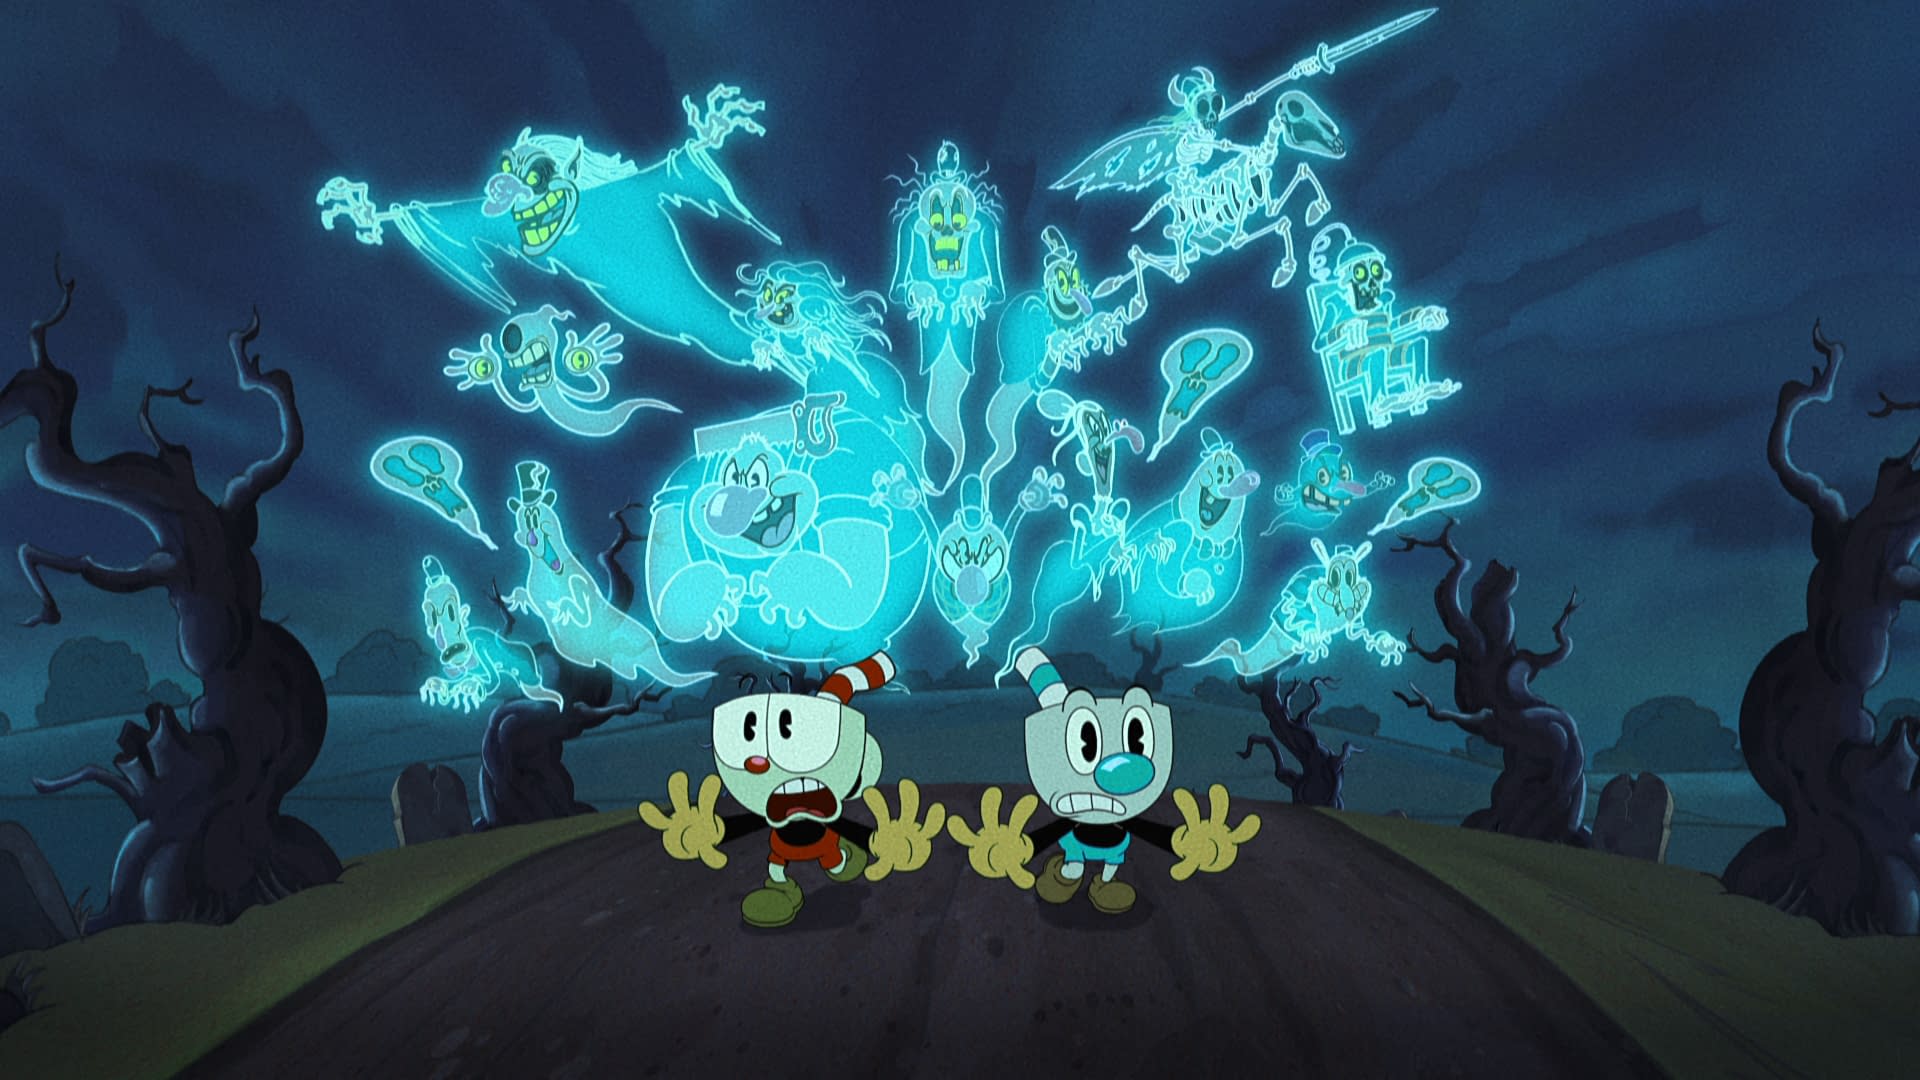 The Cuphead Show! Images: Cuphead, Mugman, King Dice & More!